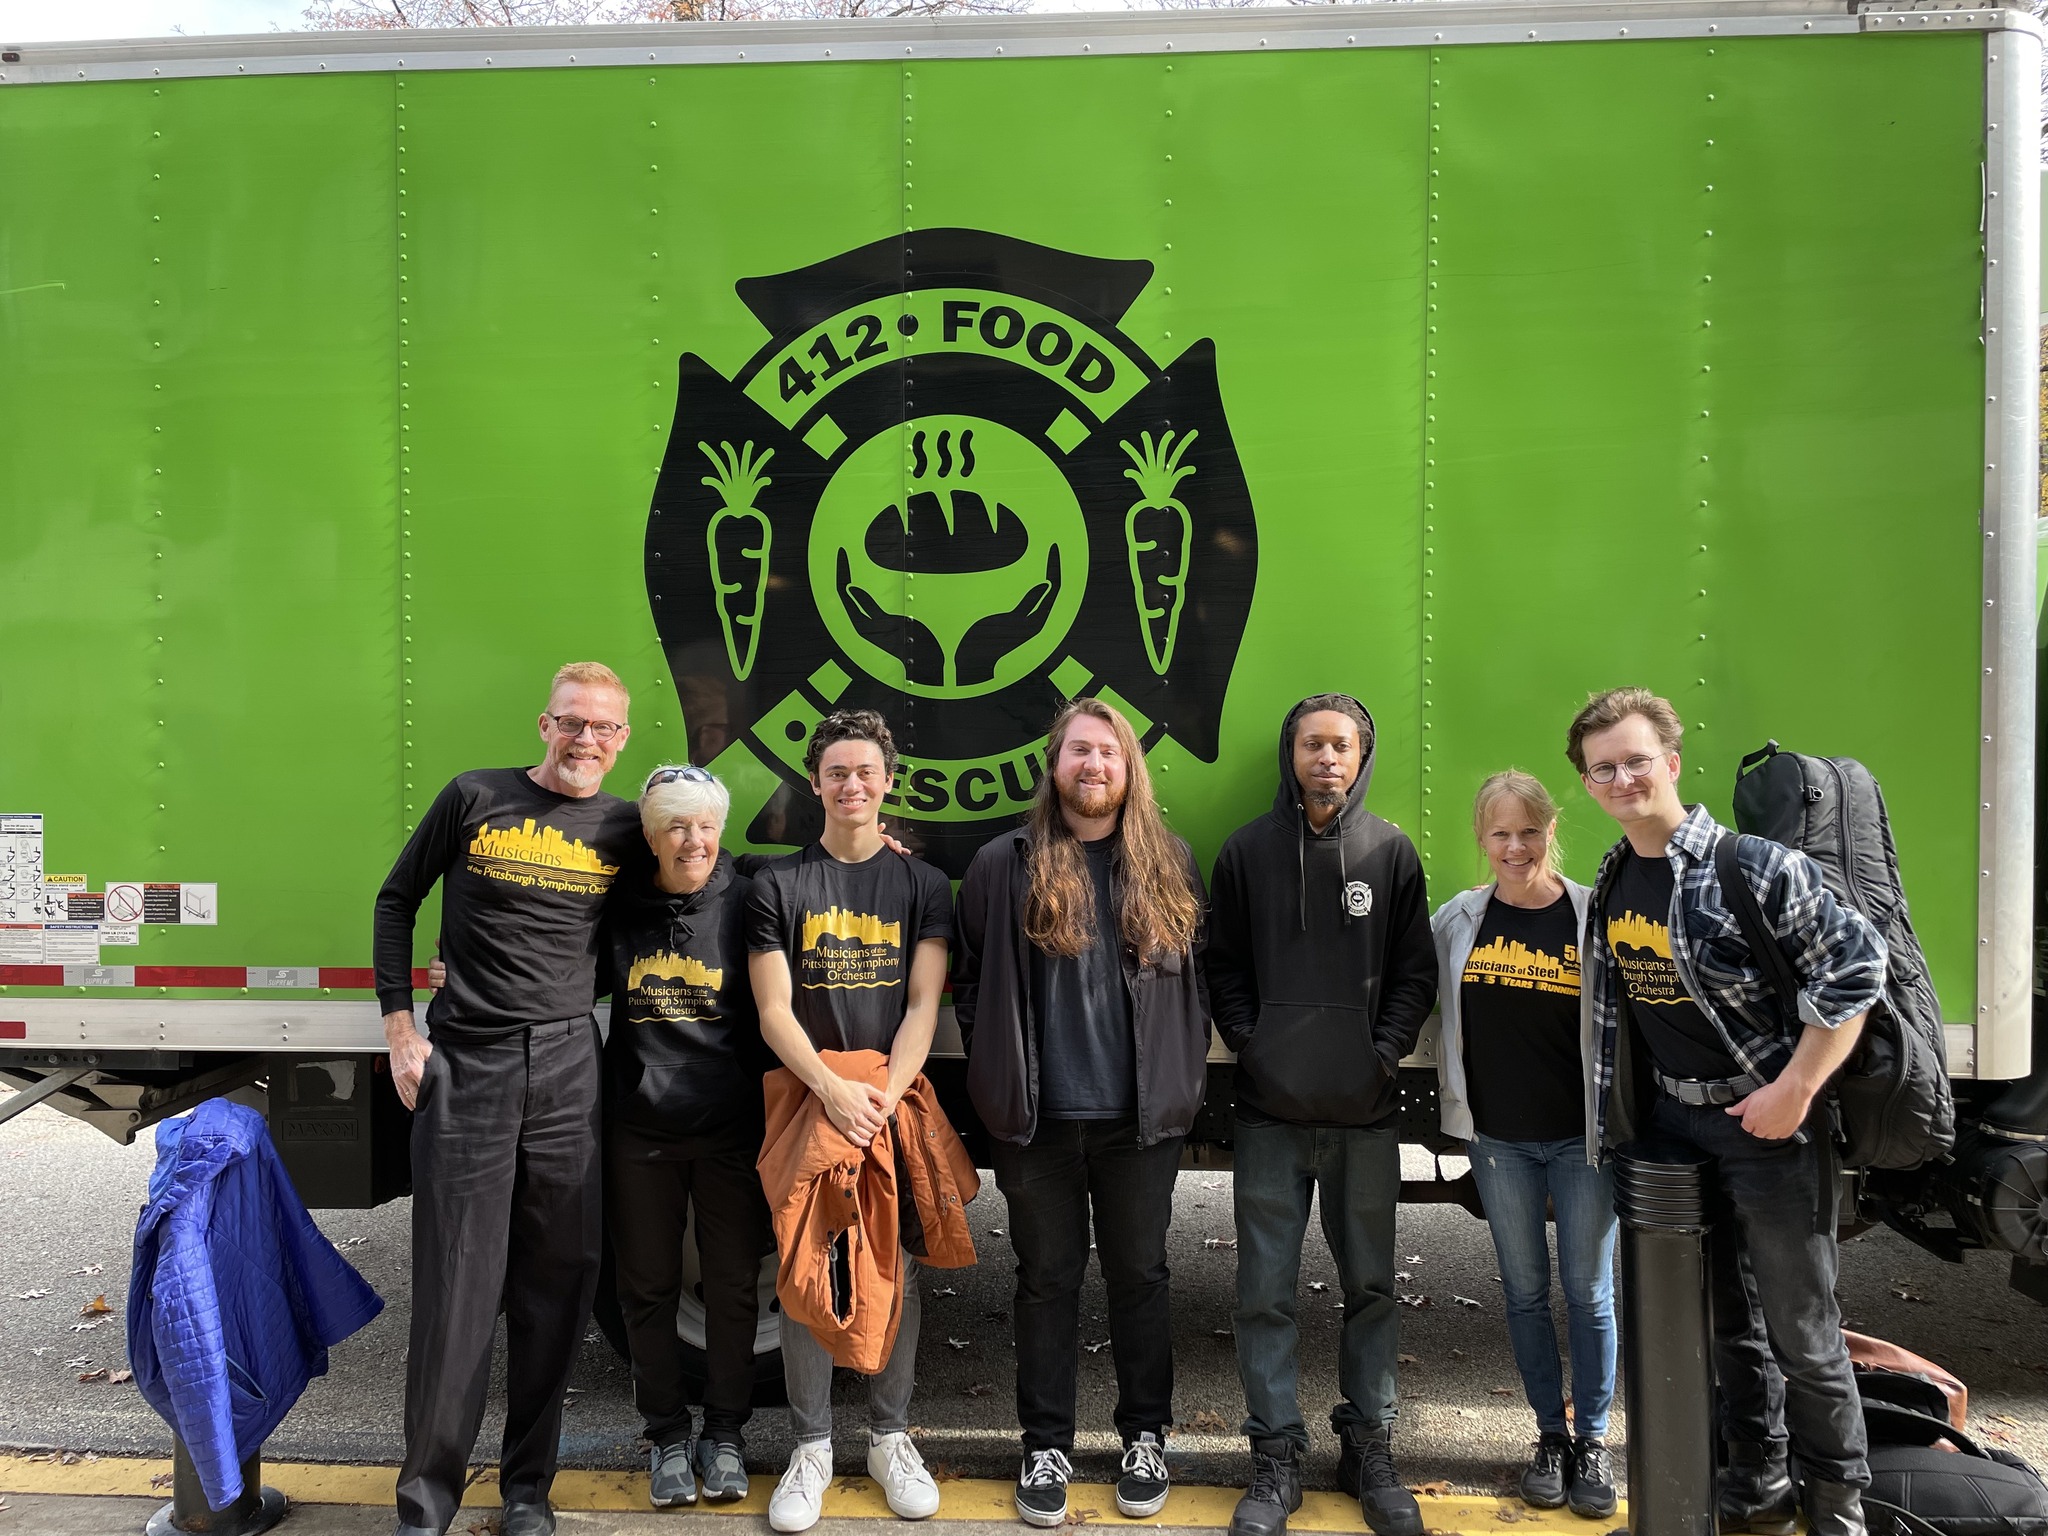 A Recipe for Community Good - 412 Food Rescue